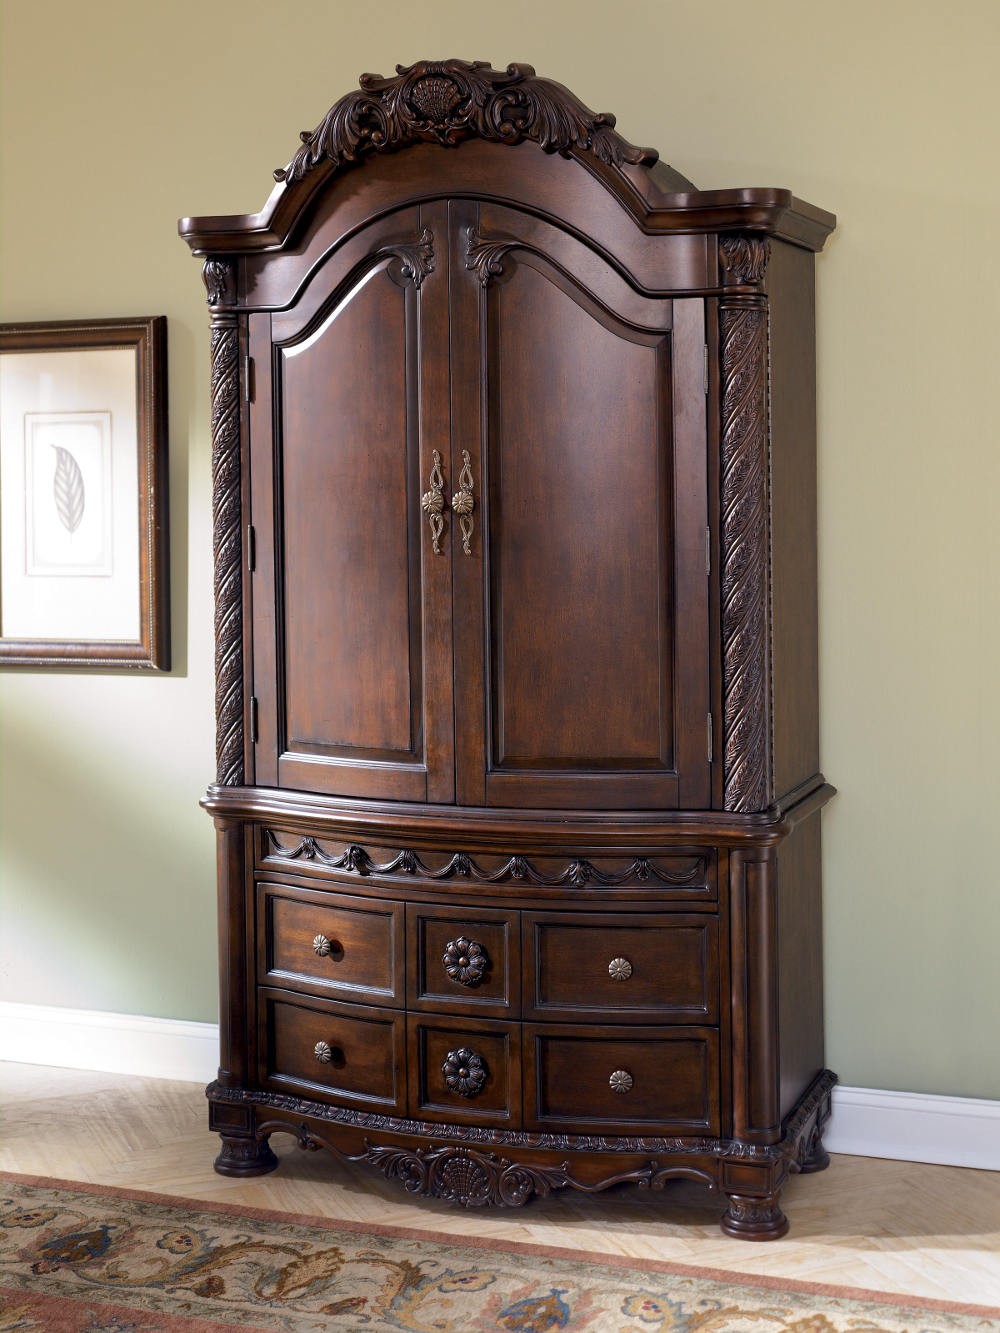 Bedroom furniture sets with armoire | Hawk Haven